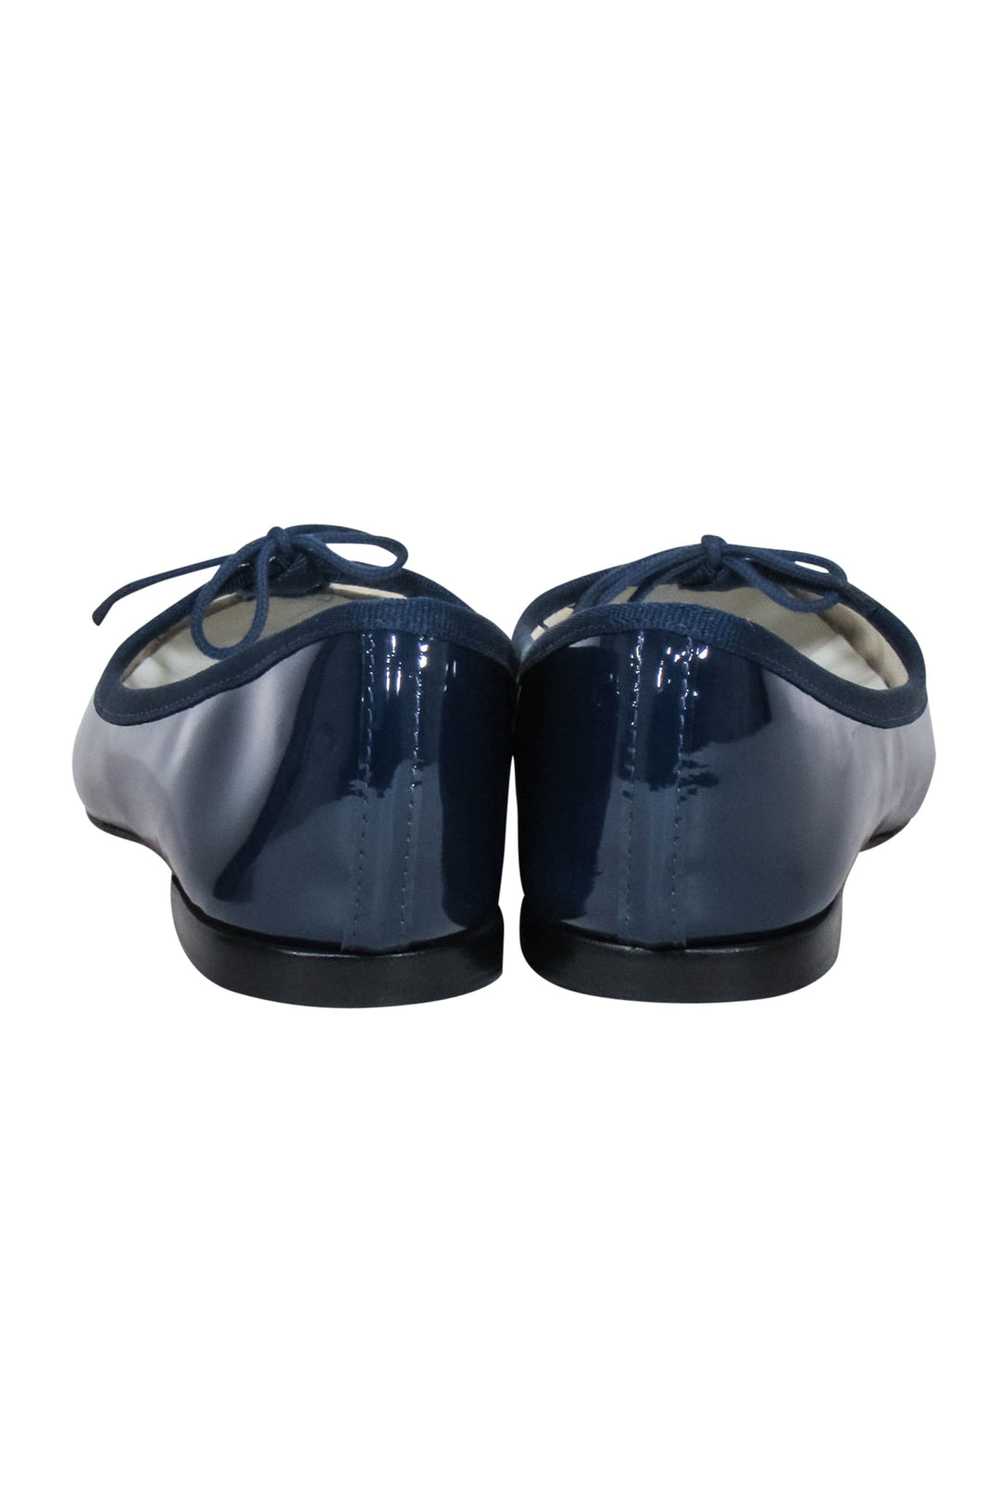 Repetto - Navy Patent Leather "Cendrillon" Ballet… - image 4